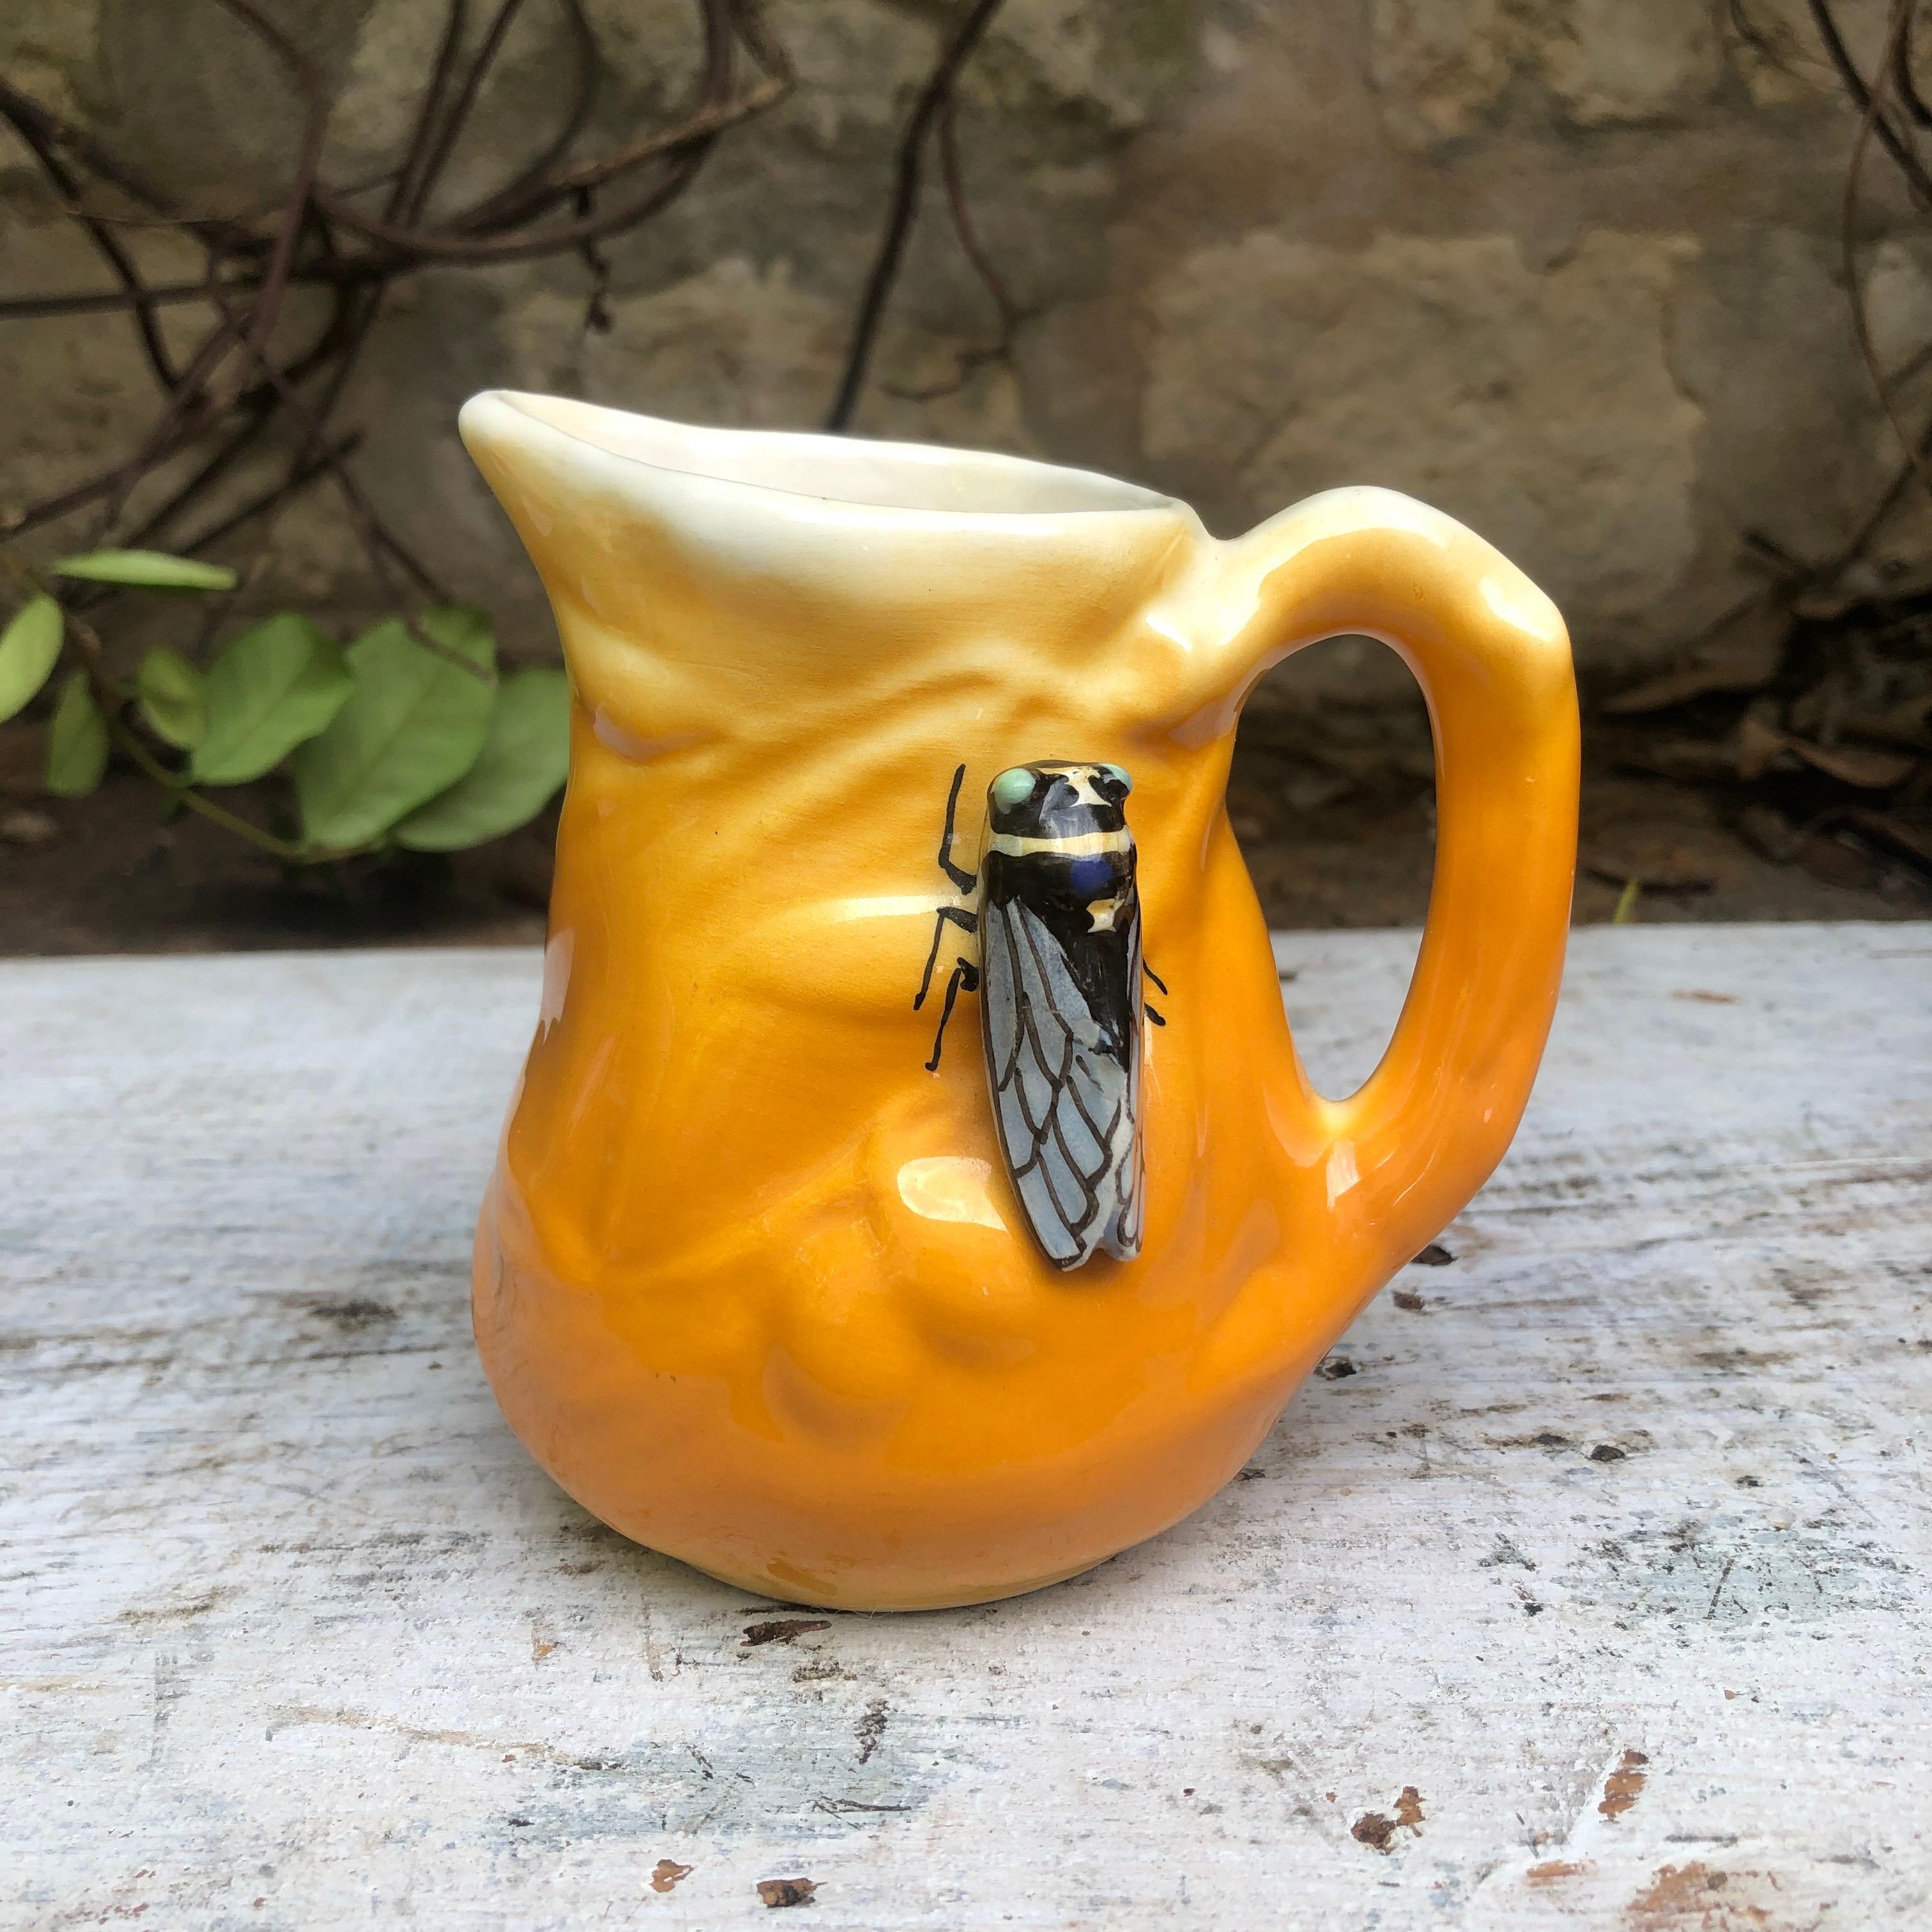 Majolica pitcher with cicada and olives signed Sicard, circa 1950.
From South of France (Provence).